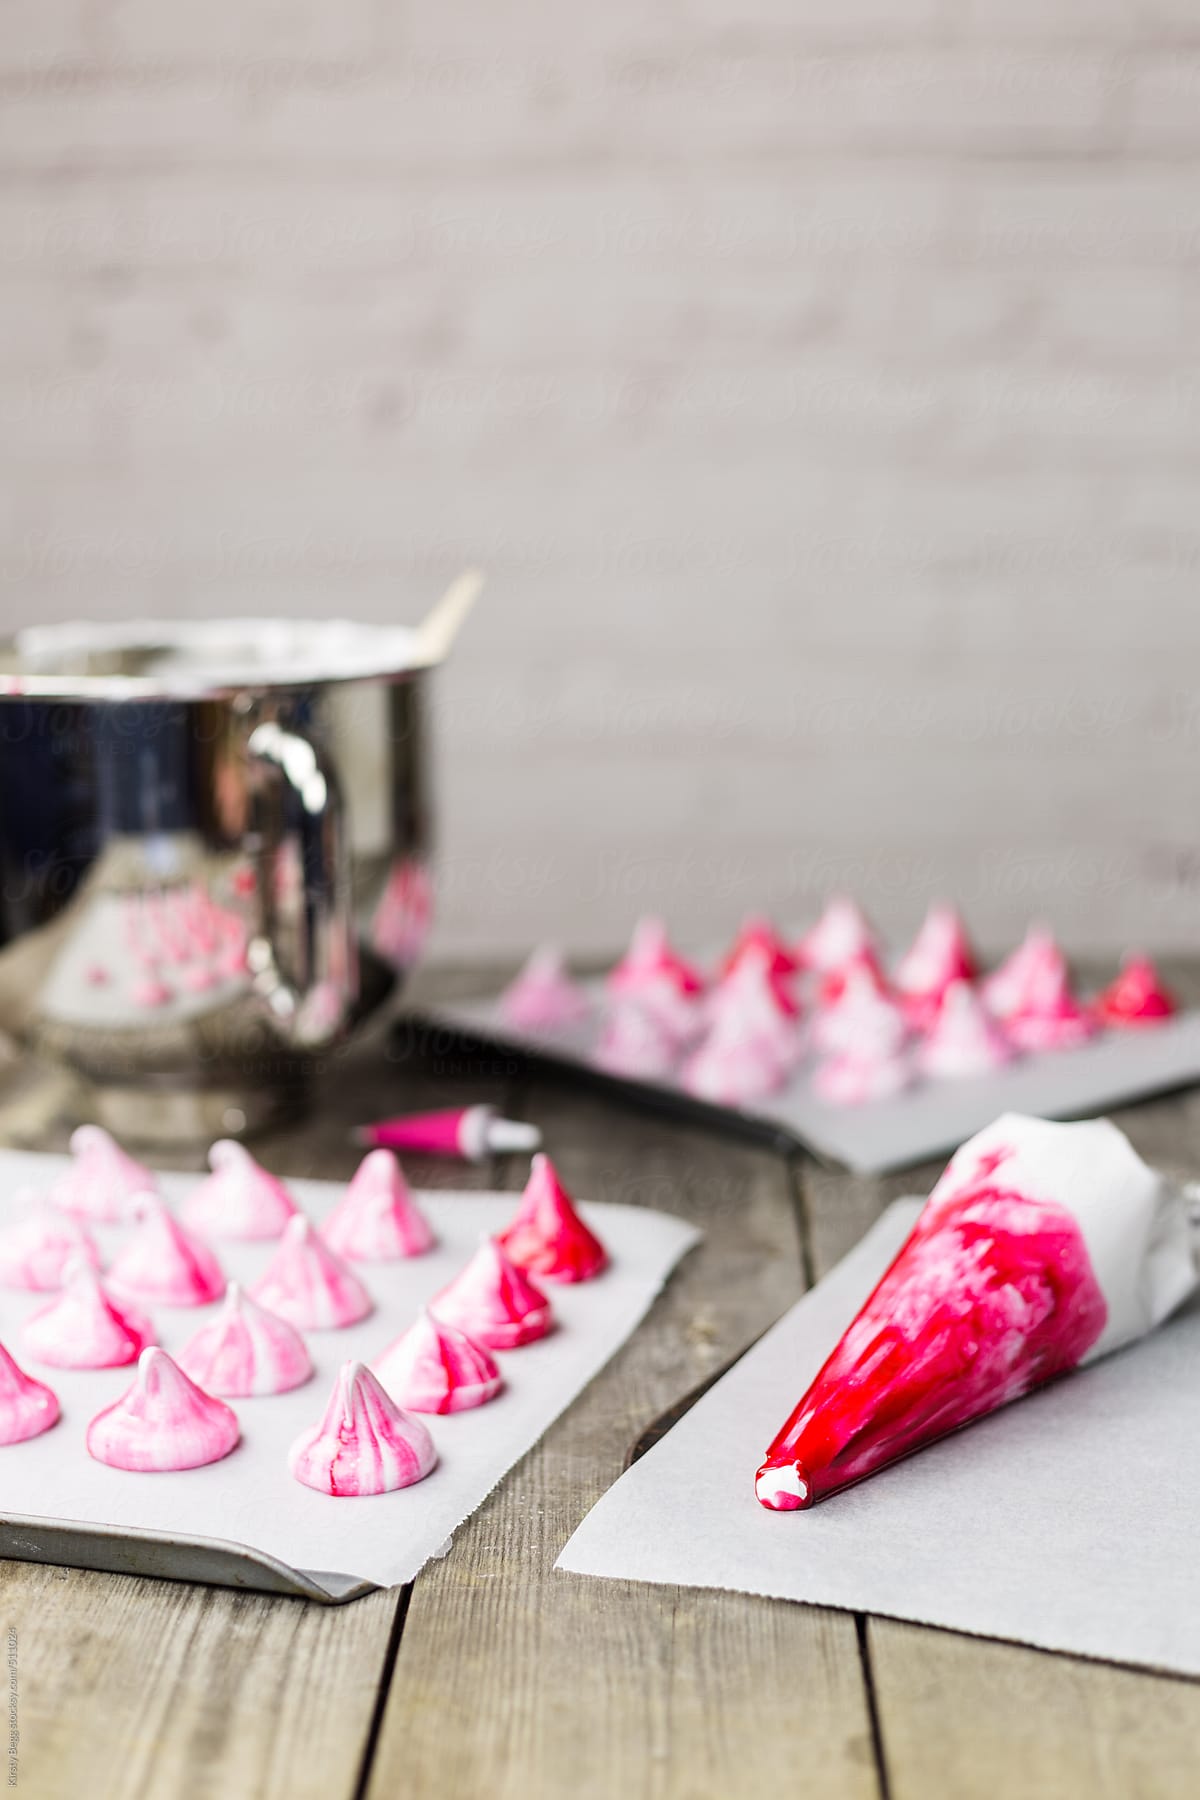 Piping bag filled with meringue and pink food colouring